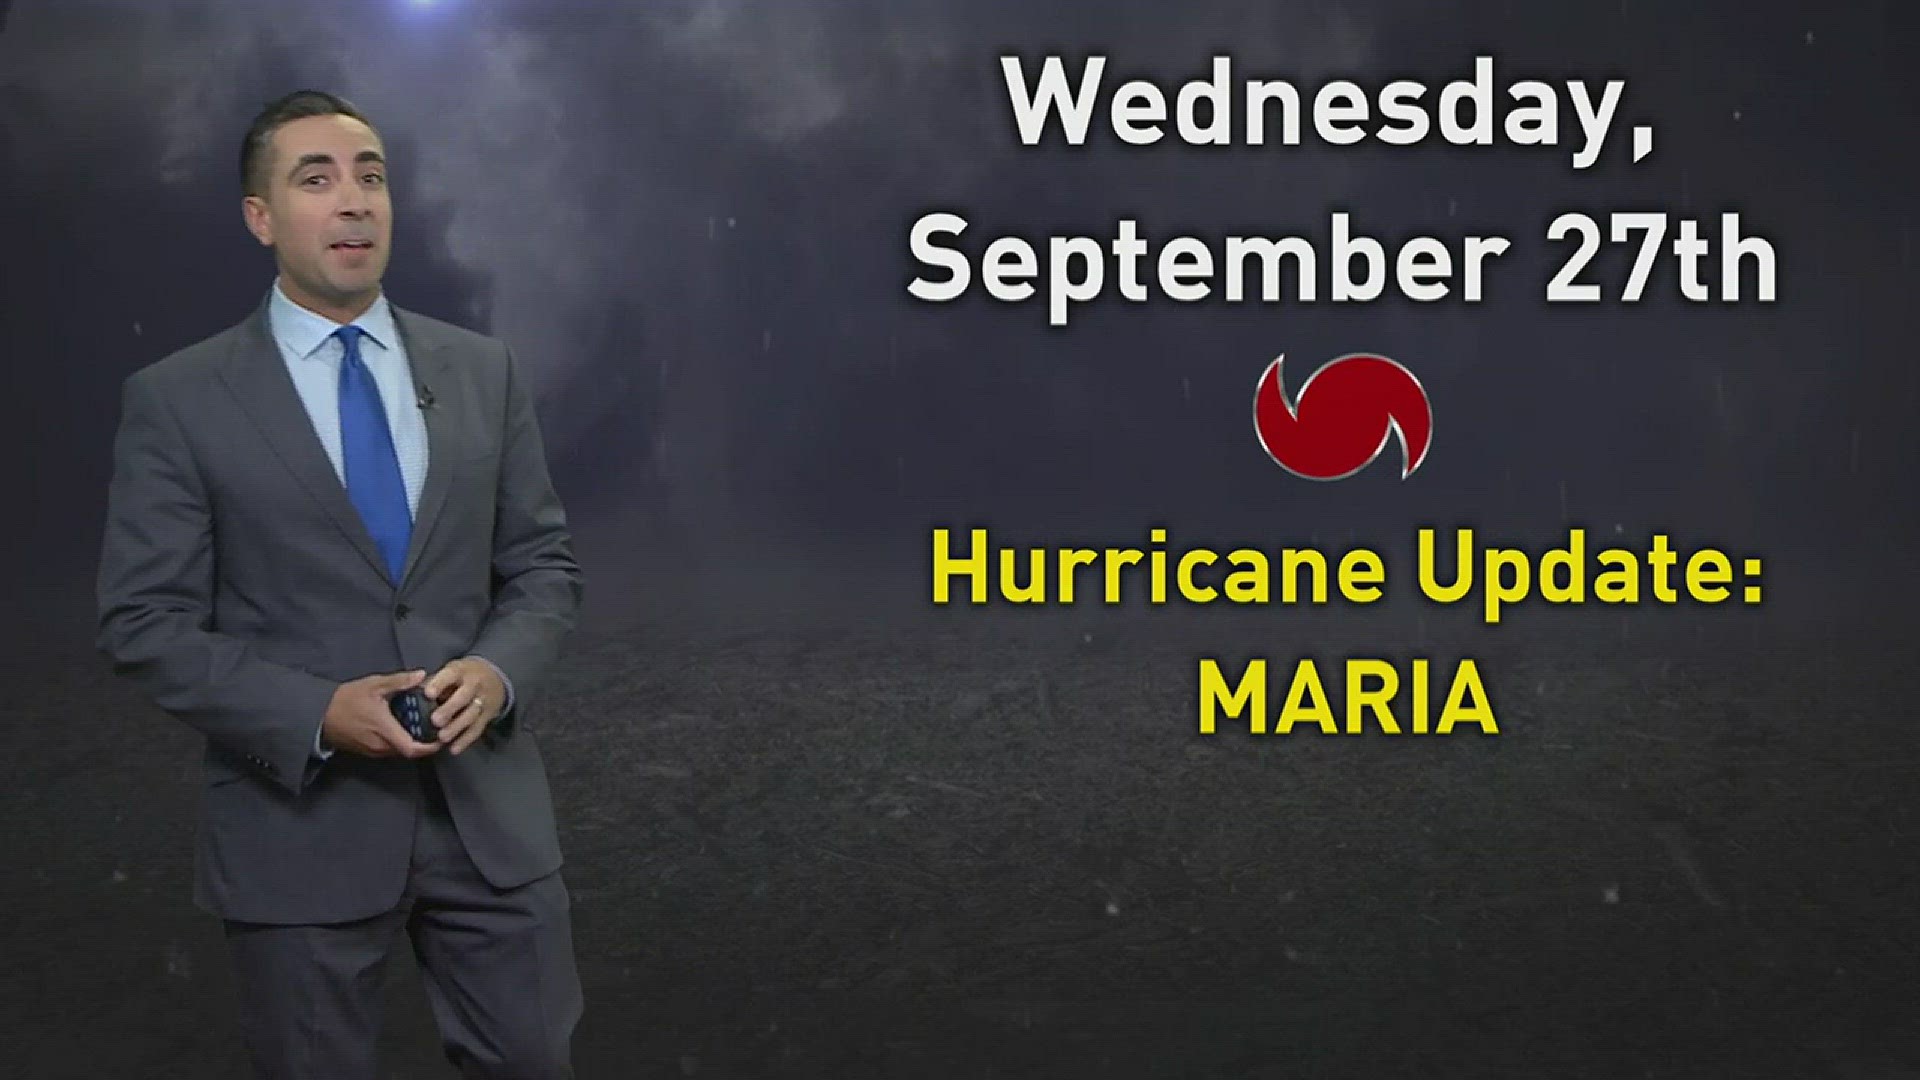 13News Now Meteorologist Tim Pandajis gives the latest forecast and models for Hurricane Maria as it churns off the Outer Banks on Wednesday, 9/27/2017.